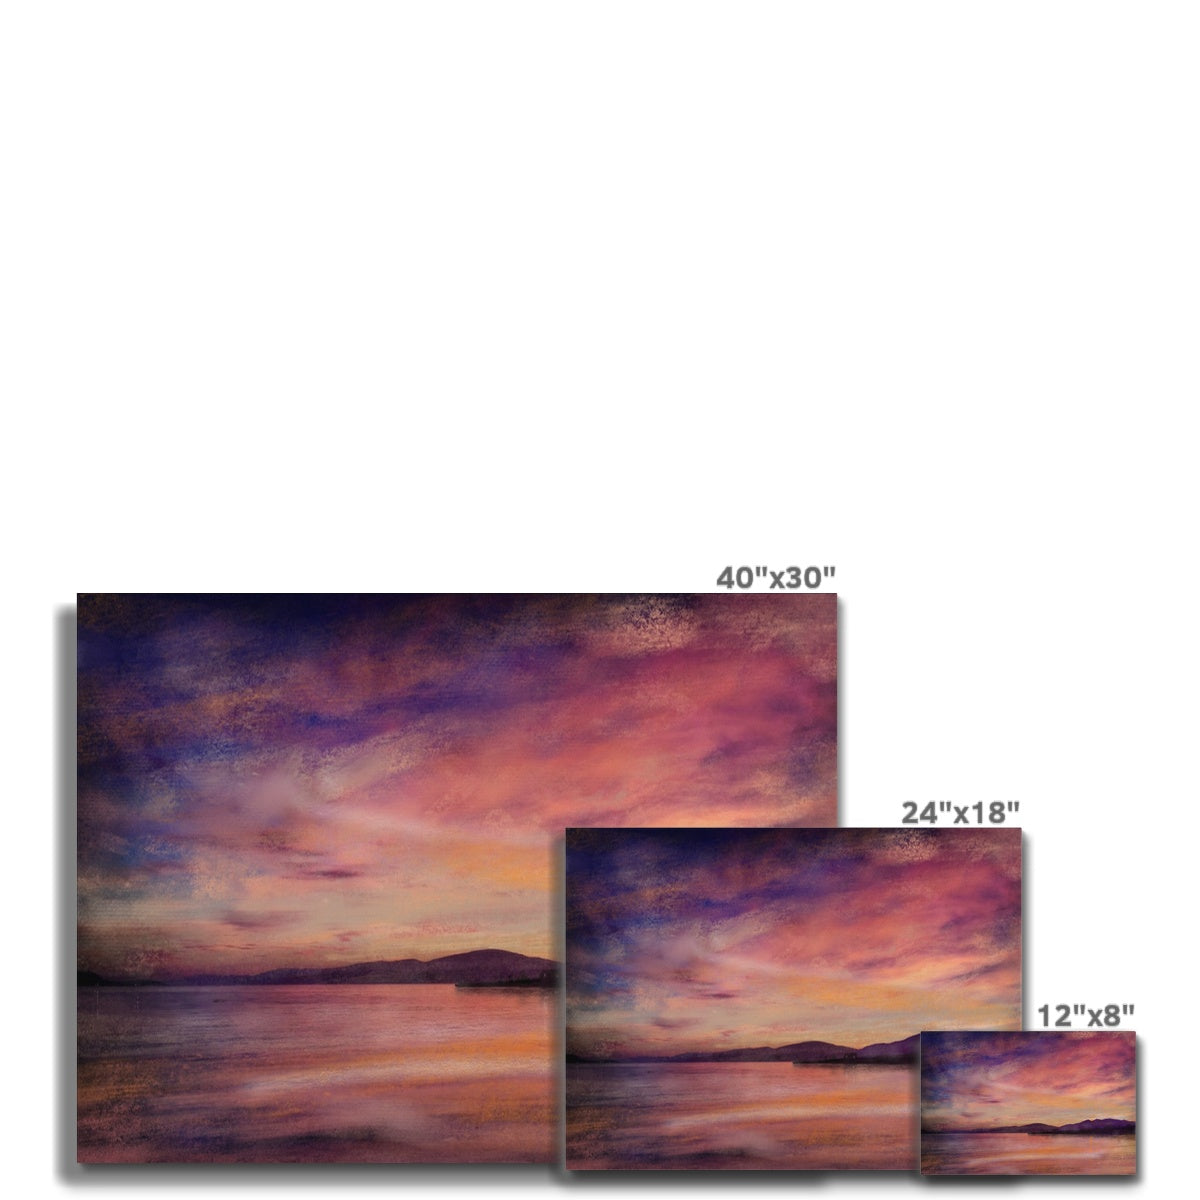 Loch Linnhe Dusk Painting | Canvas From Scotland-Contemporary Stretched Canvas Prints-Scottish Lochs & Mountains Art Gallery-Paintings, Prints, Homeware, Art Gifts From Scotland By Scottish Artist Kevin Hunter